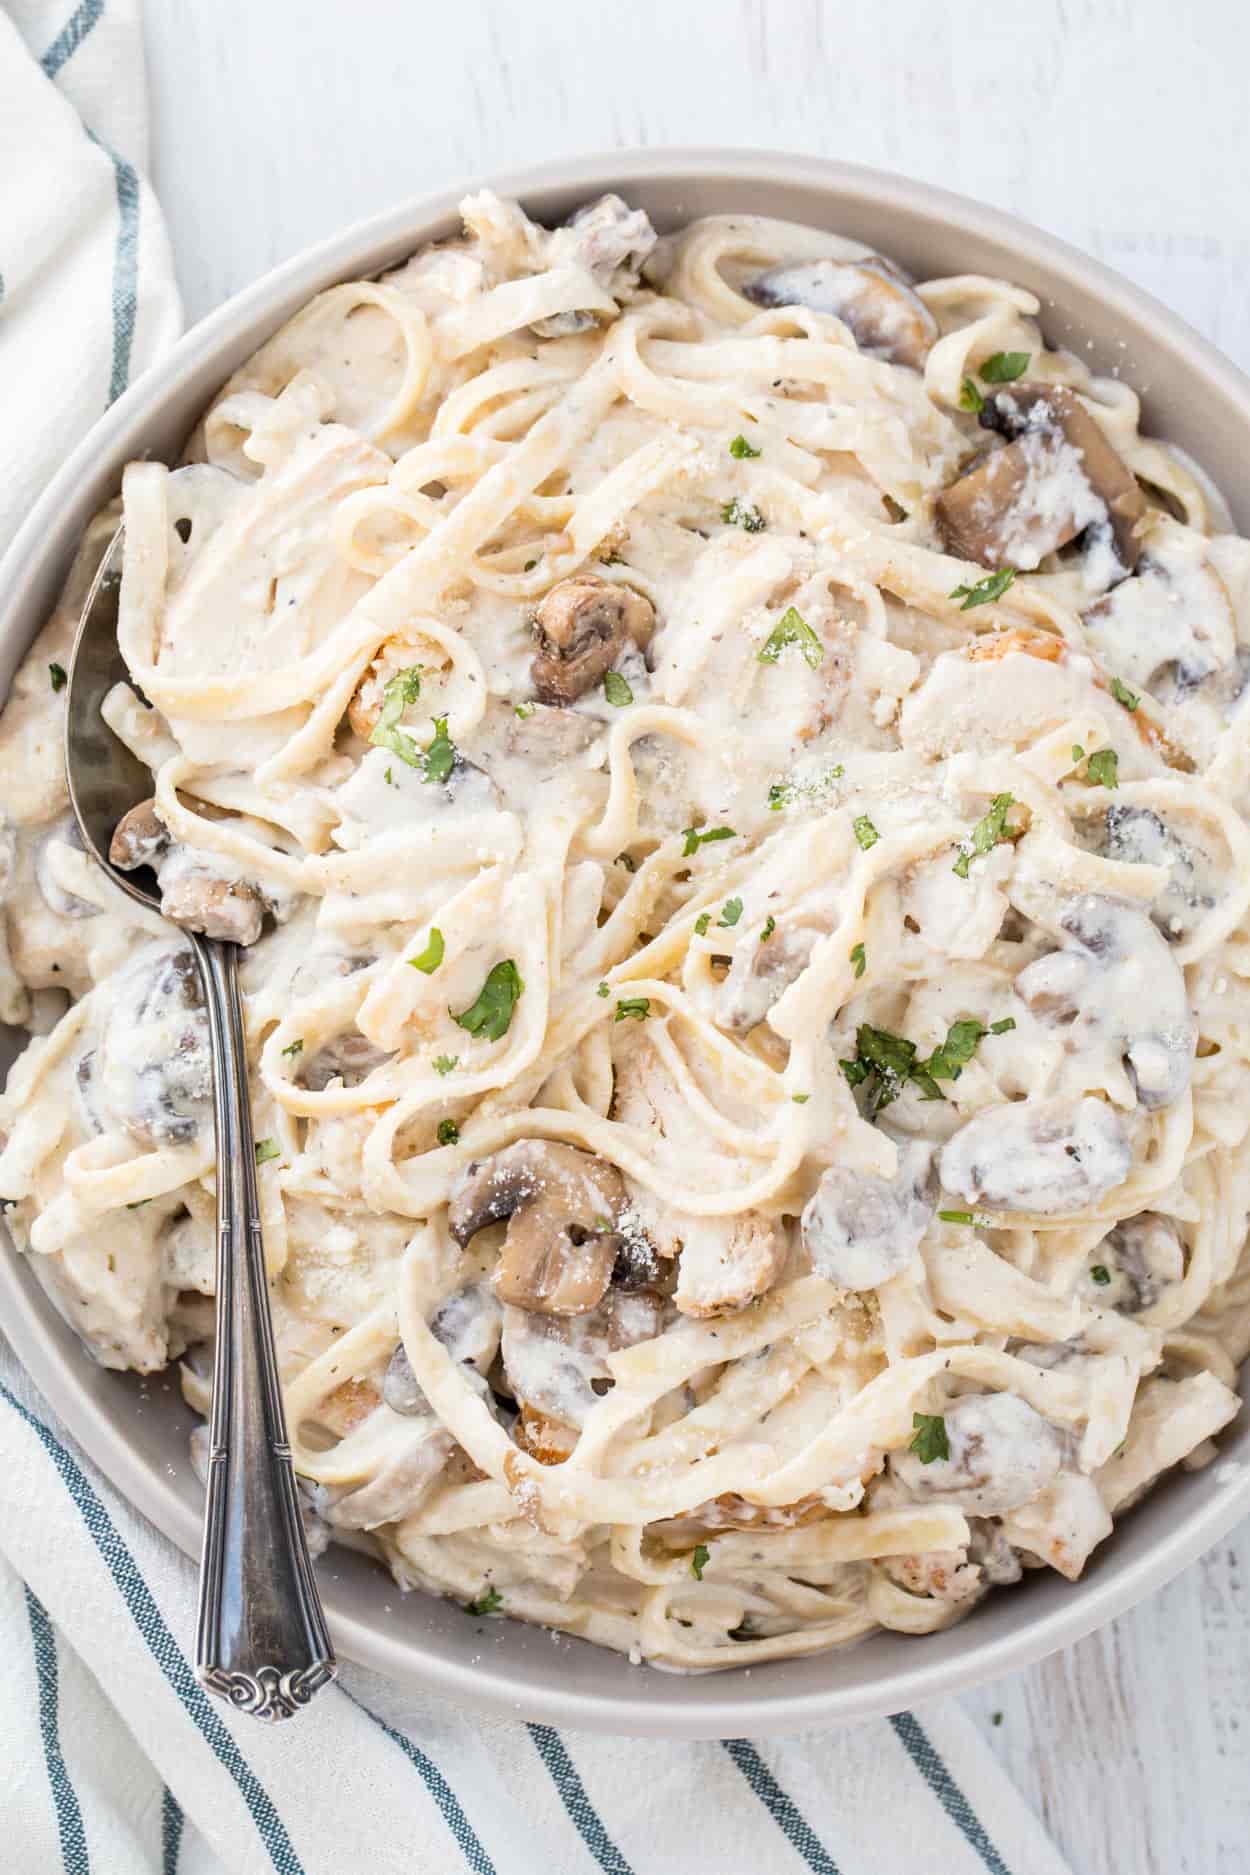 Chicken fettuccine Alfredo in a bowl with mushroom and fresh chopped herbs.